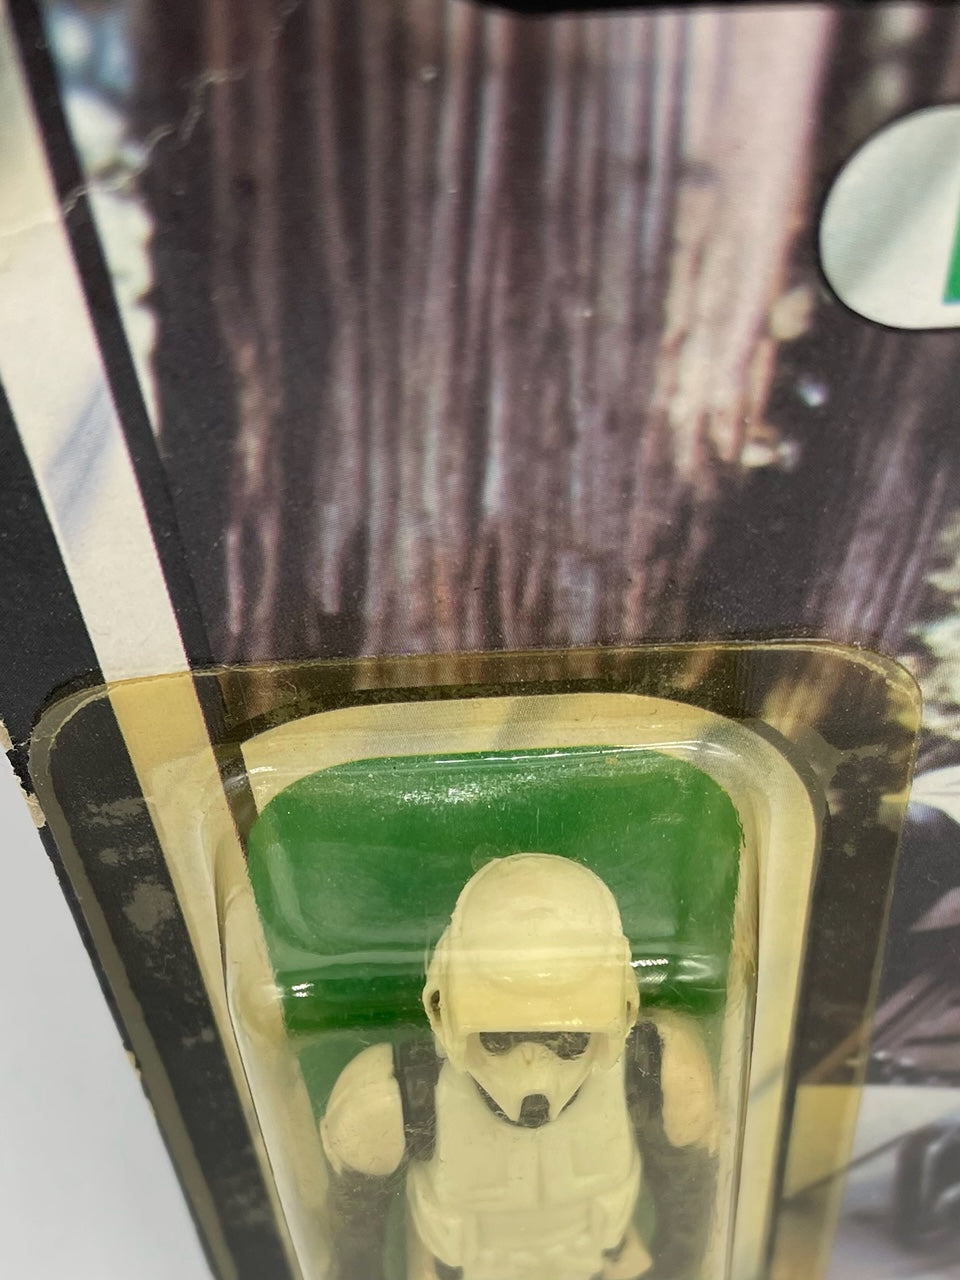 Kenner 65A Biker Scout MOC Carded Action Figure